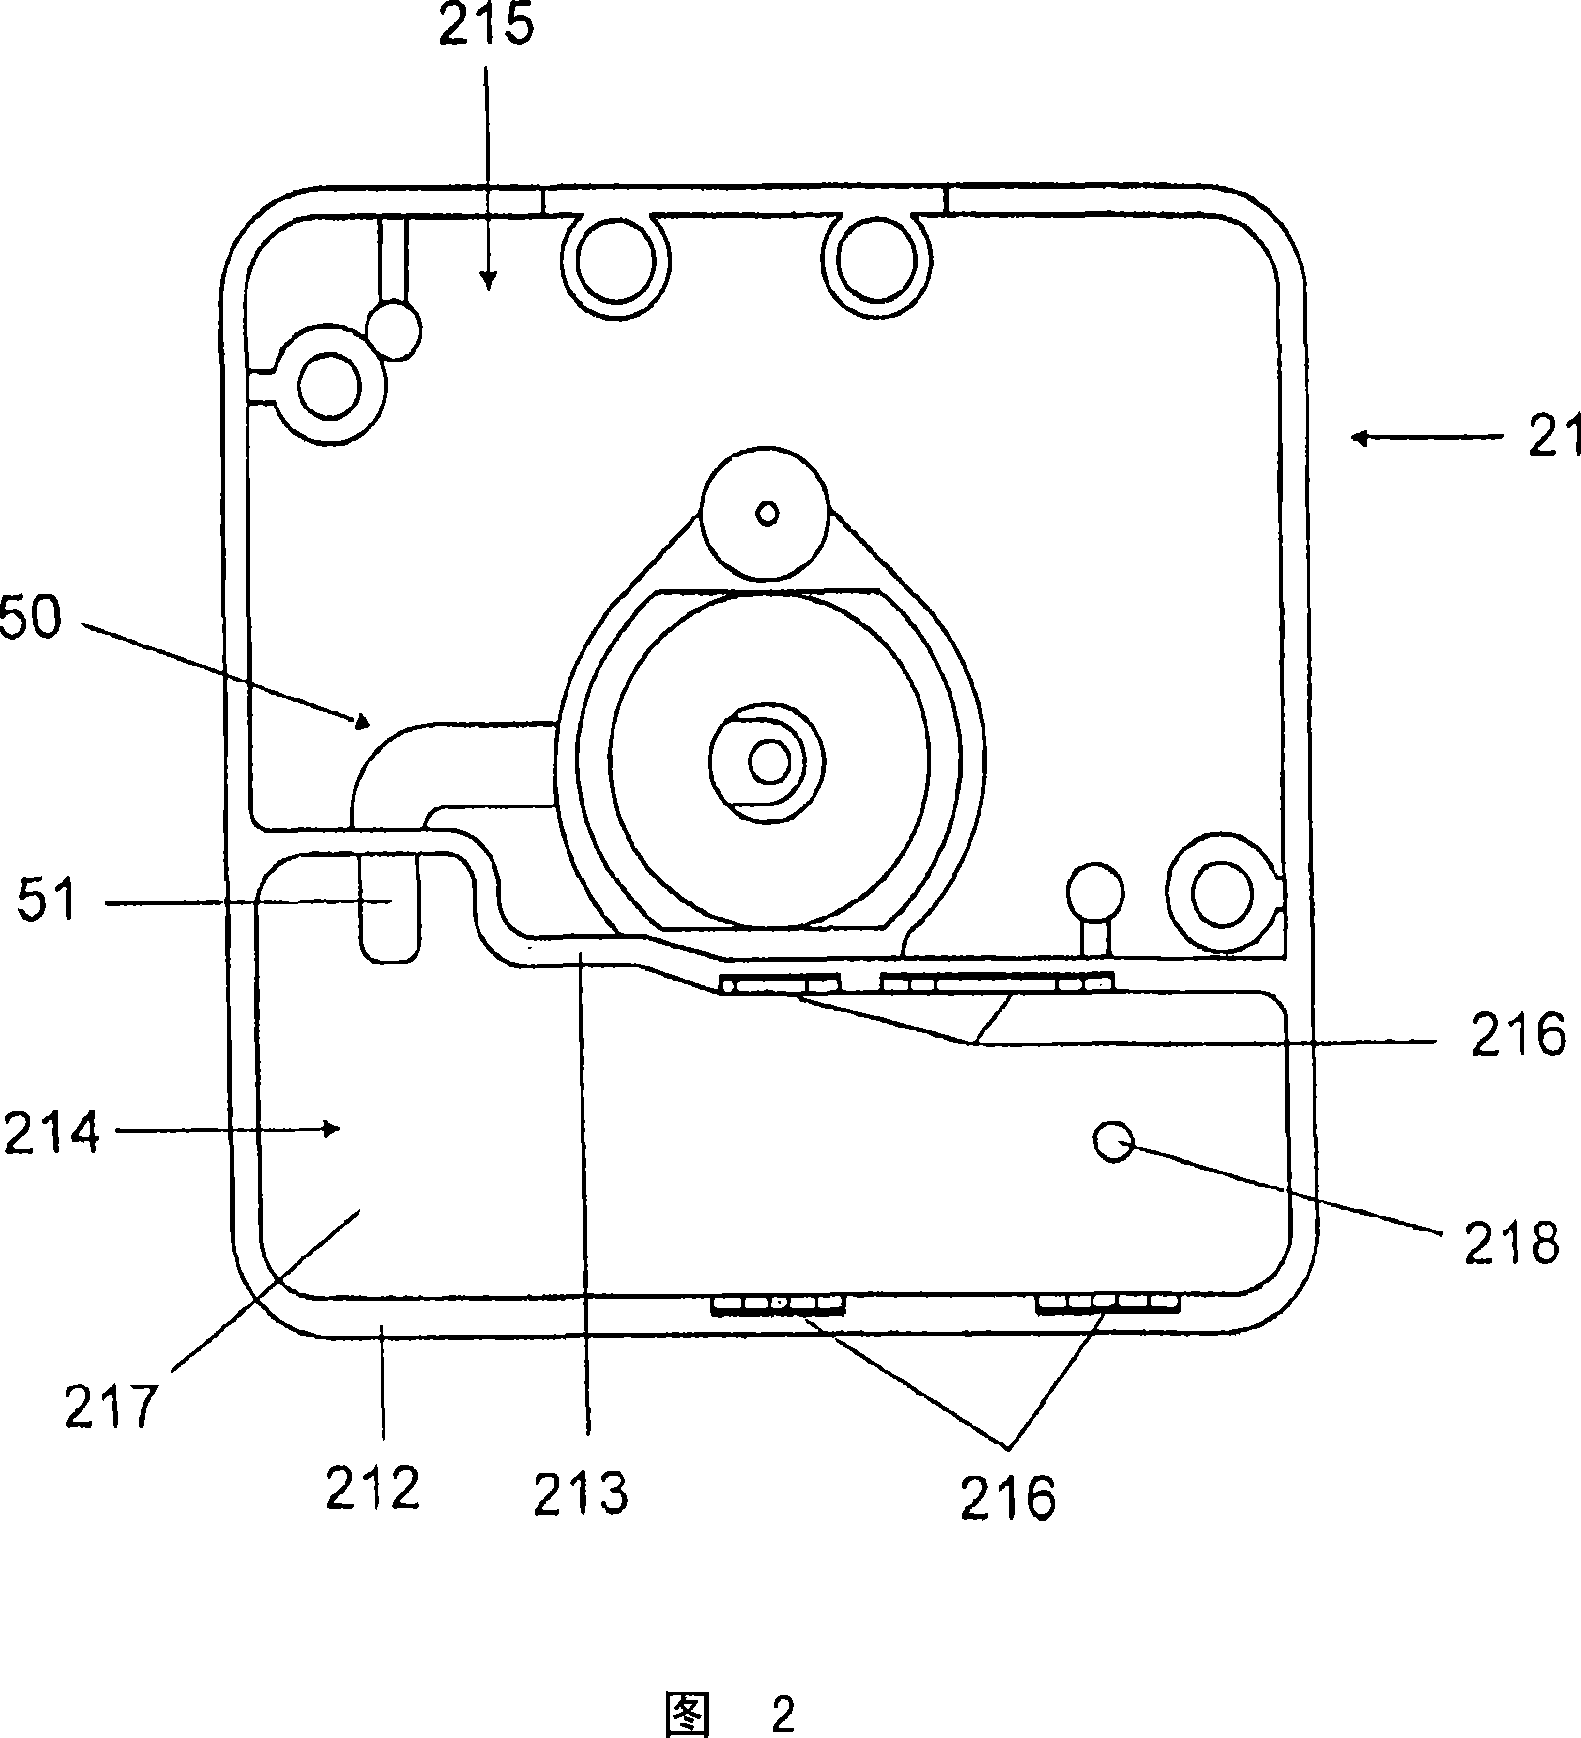 Base for a high-pressure discharge lamp, and high-pressure discharge lamp